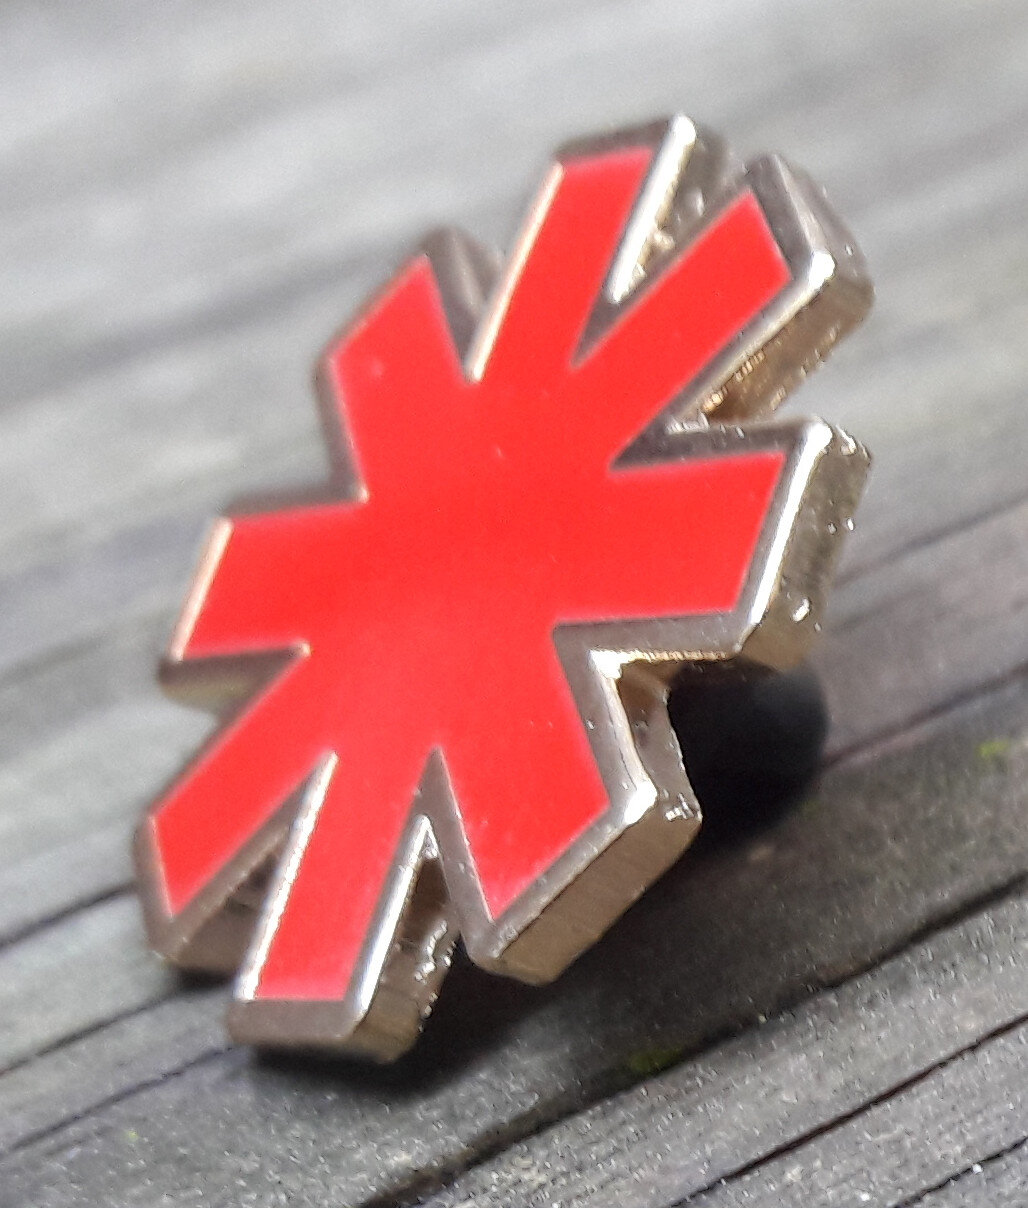 Pin Button Badge Ø38mm Red Hot Chili Peppers Red Hot RHCP 